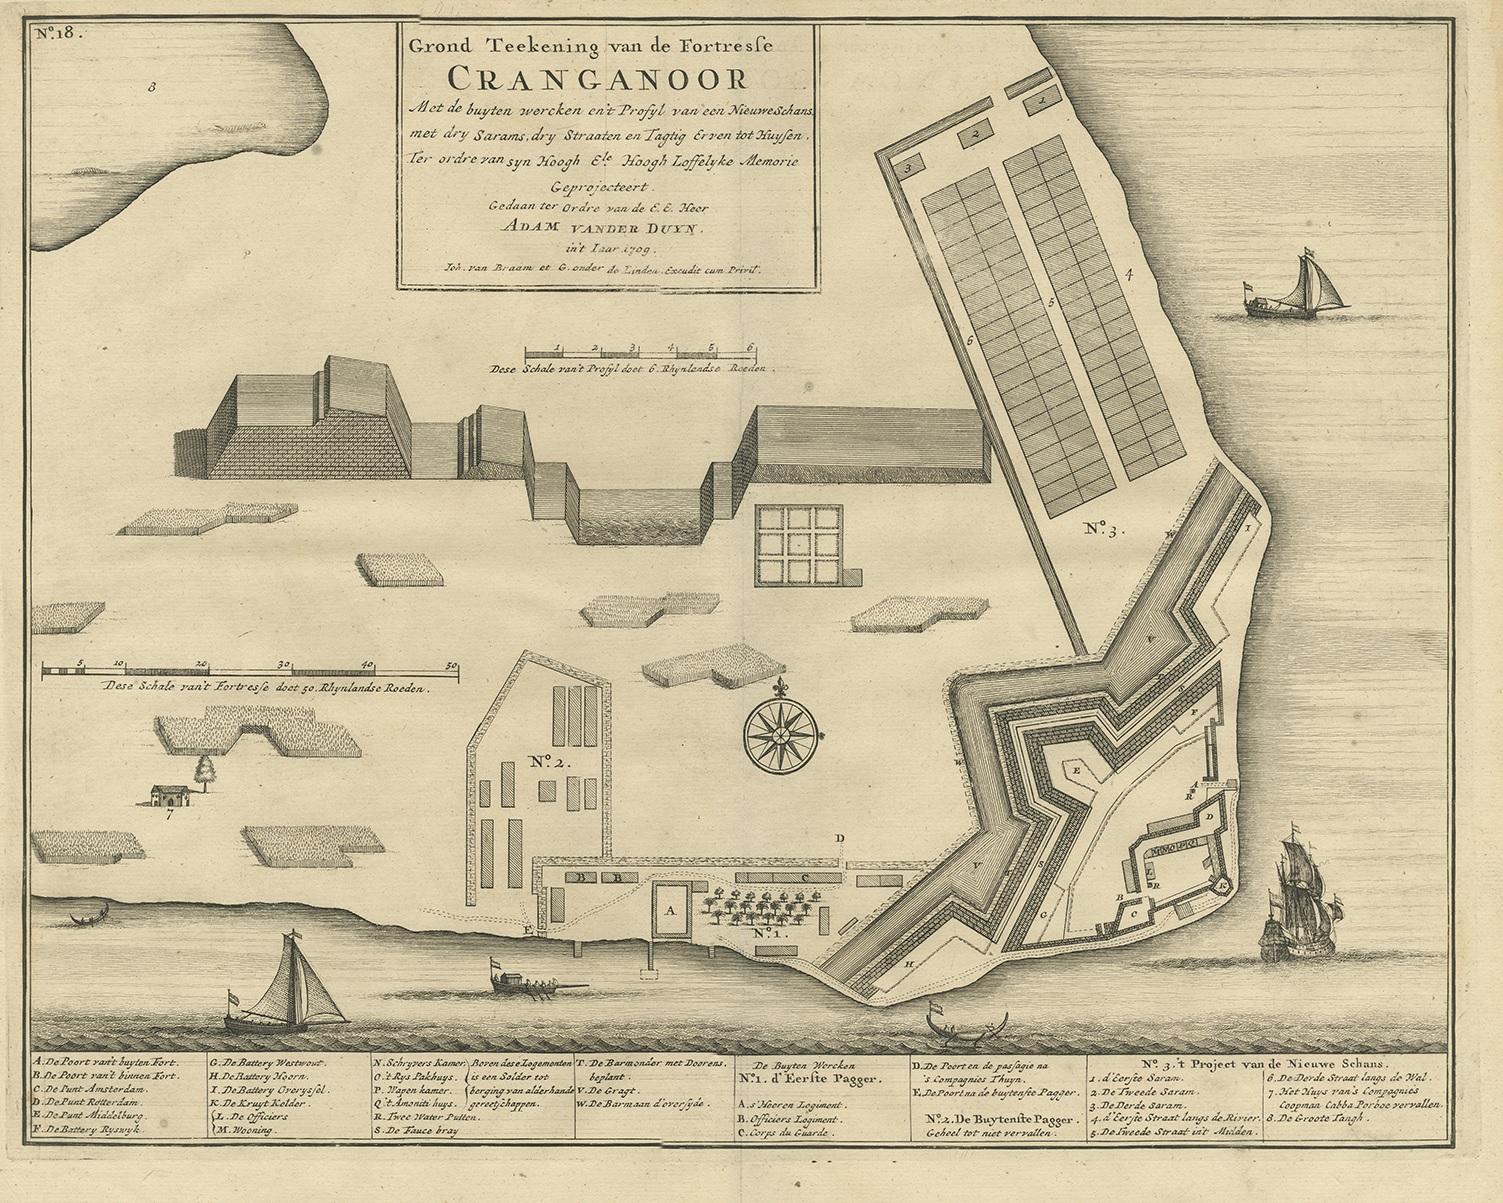 Antique print titled 'Grond Teekening van de Fortresse Cranganoor (..)'. The Cranganore Fort, also known as Kodungallur Fort, was built by the Portuguese in 1523. The Dutch took possession of it in 1661 and it belonged to the Dutch East India